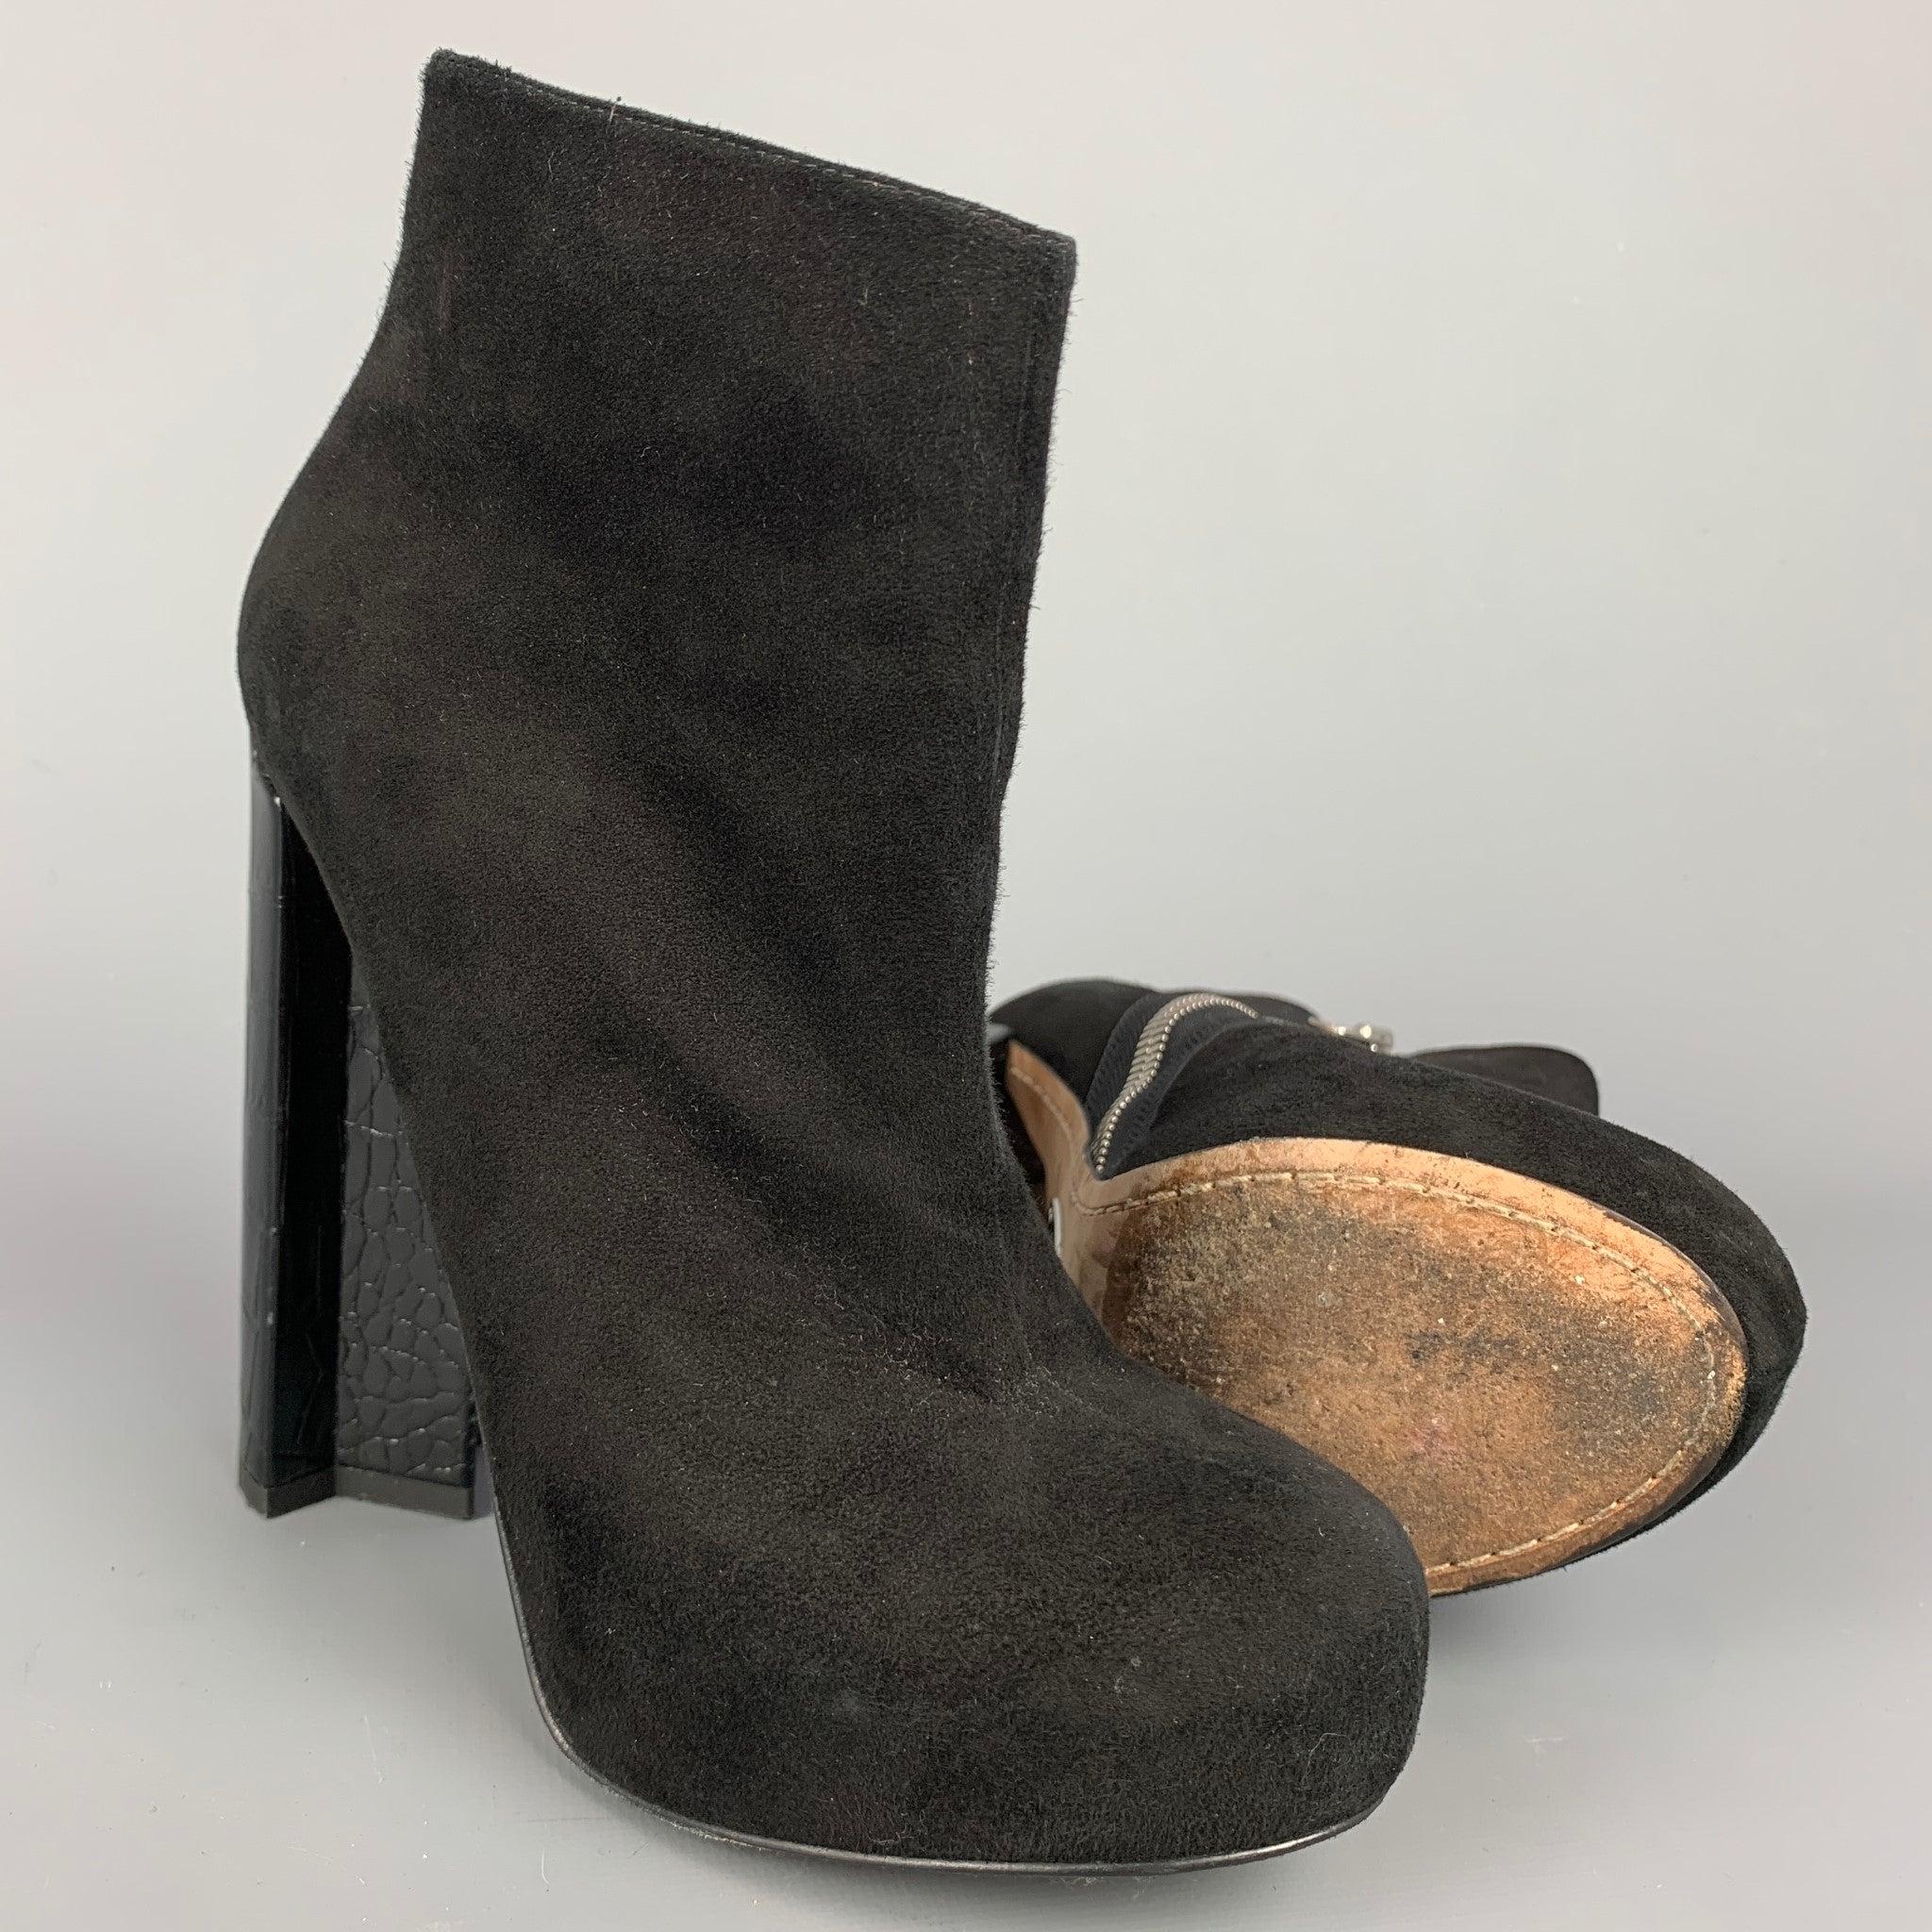 ALEJANDRO INGELMO Size 5.5 Black Suede Platform Ankle Boots In Good Condition For Sale In San Francisco, CA